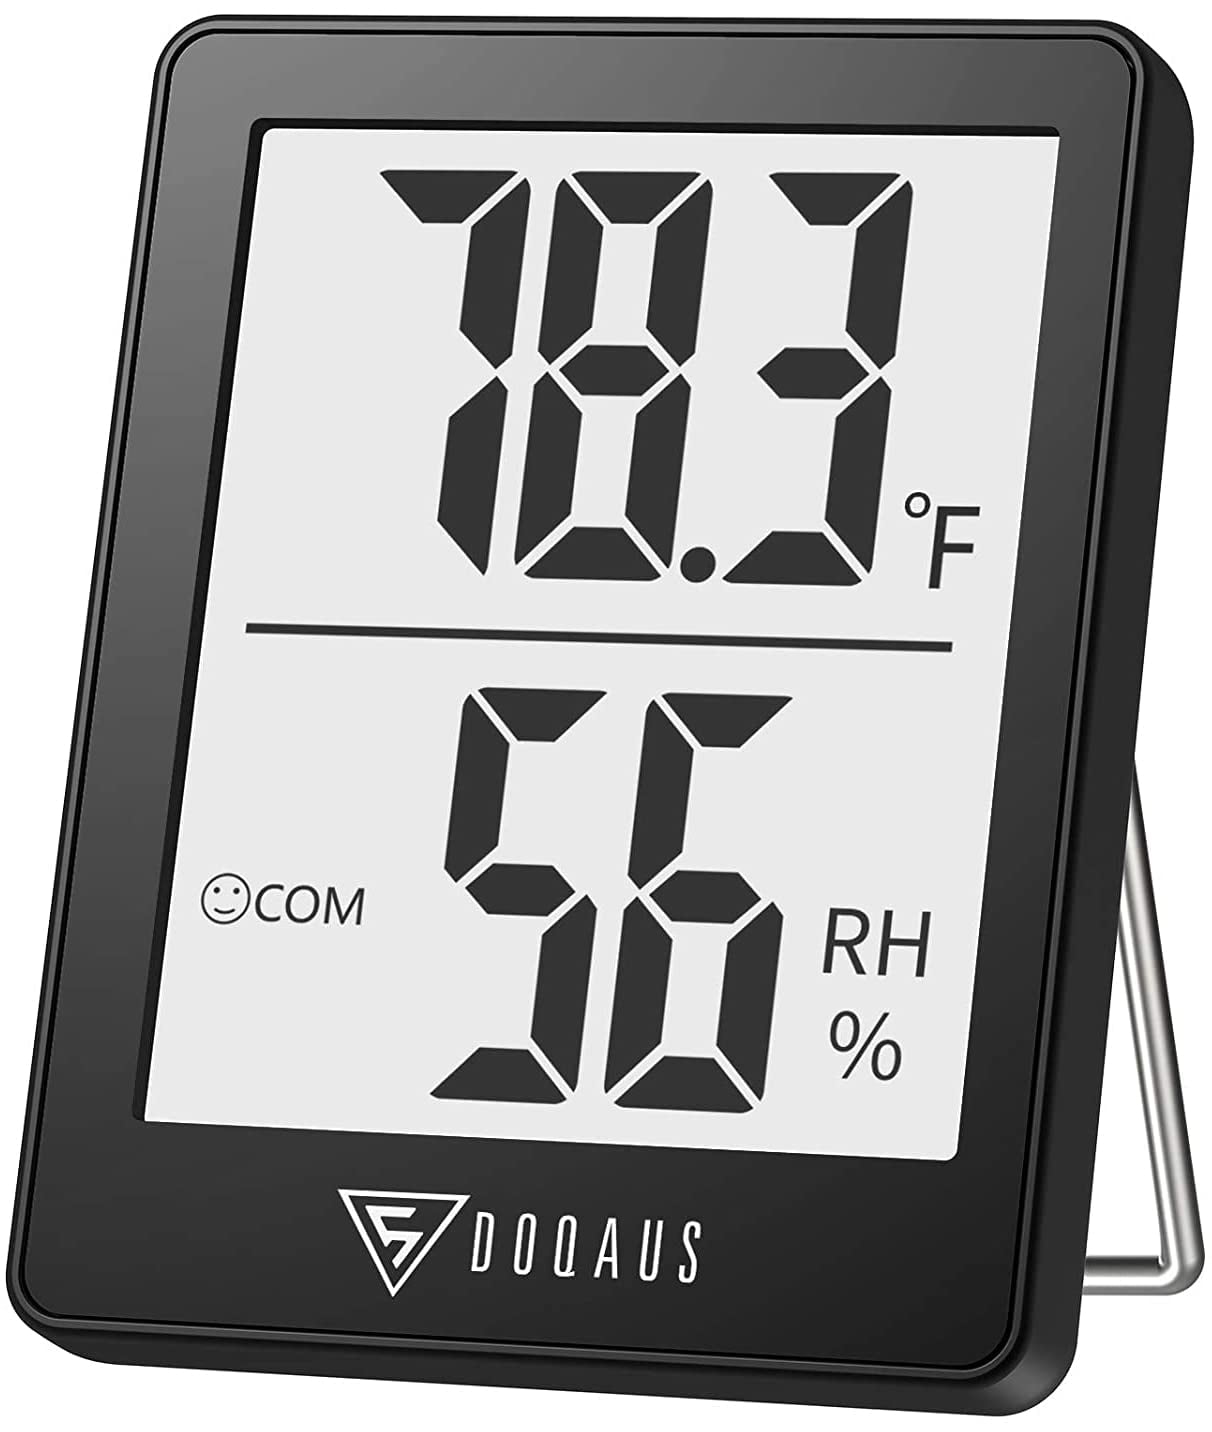 DOQAUS Digital Hygrometer Indoor Thermometer Humidity Meter Room  Thermometer with 5s Fast Refresh Accurate Temperature Humidity Monitor for  Home